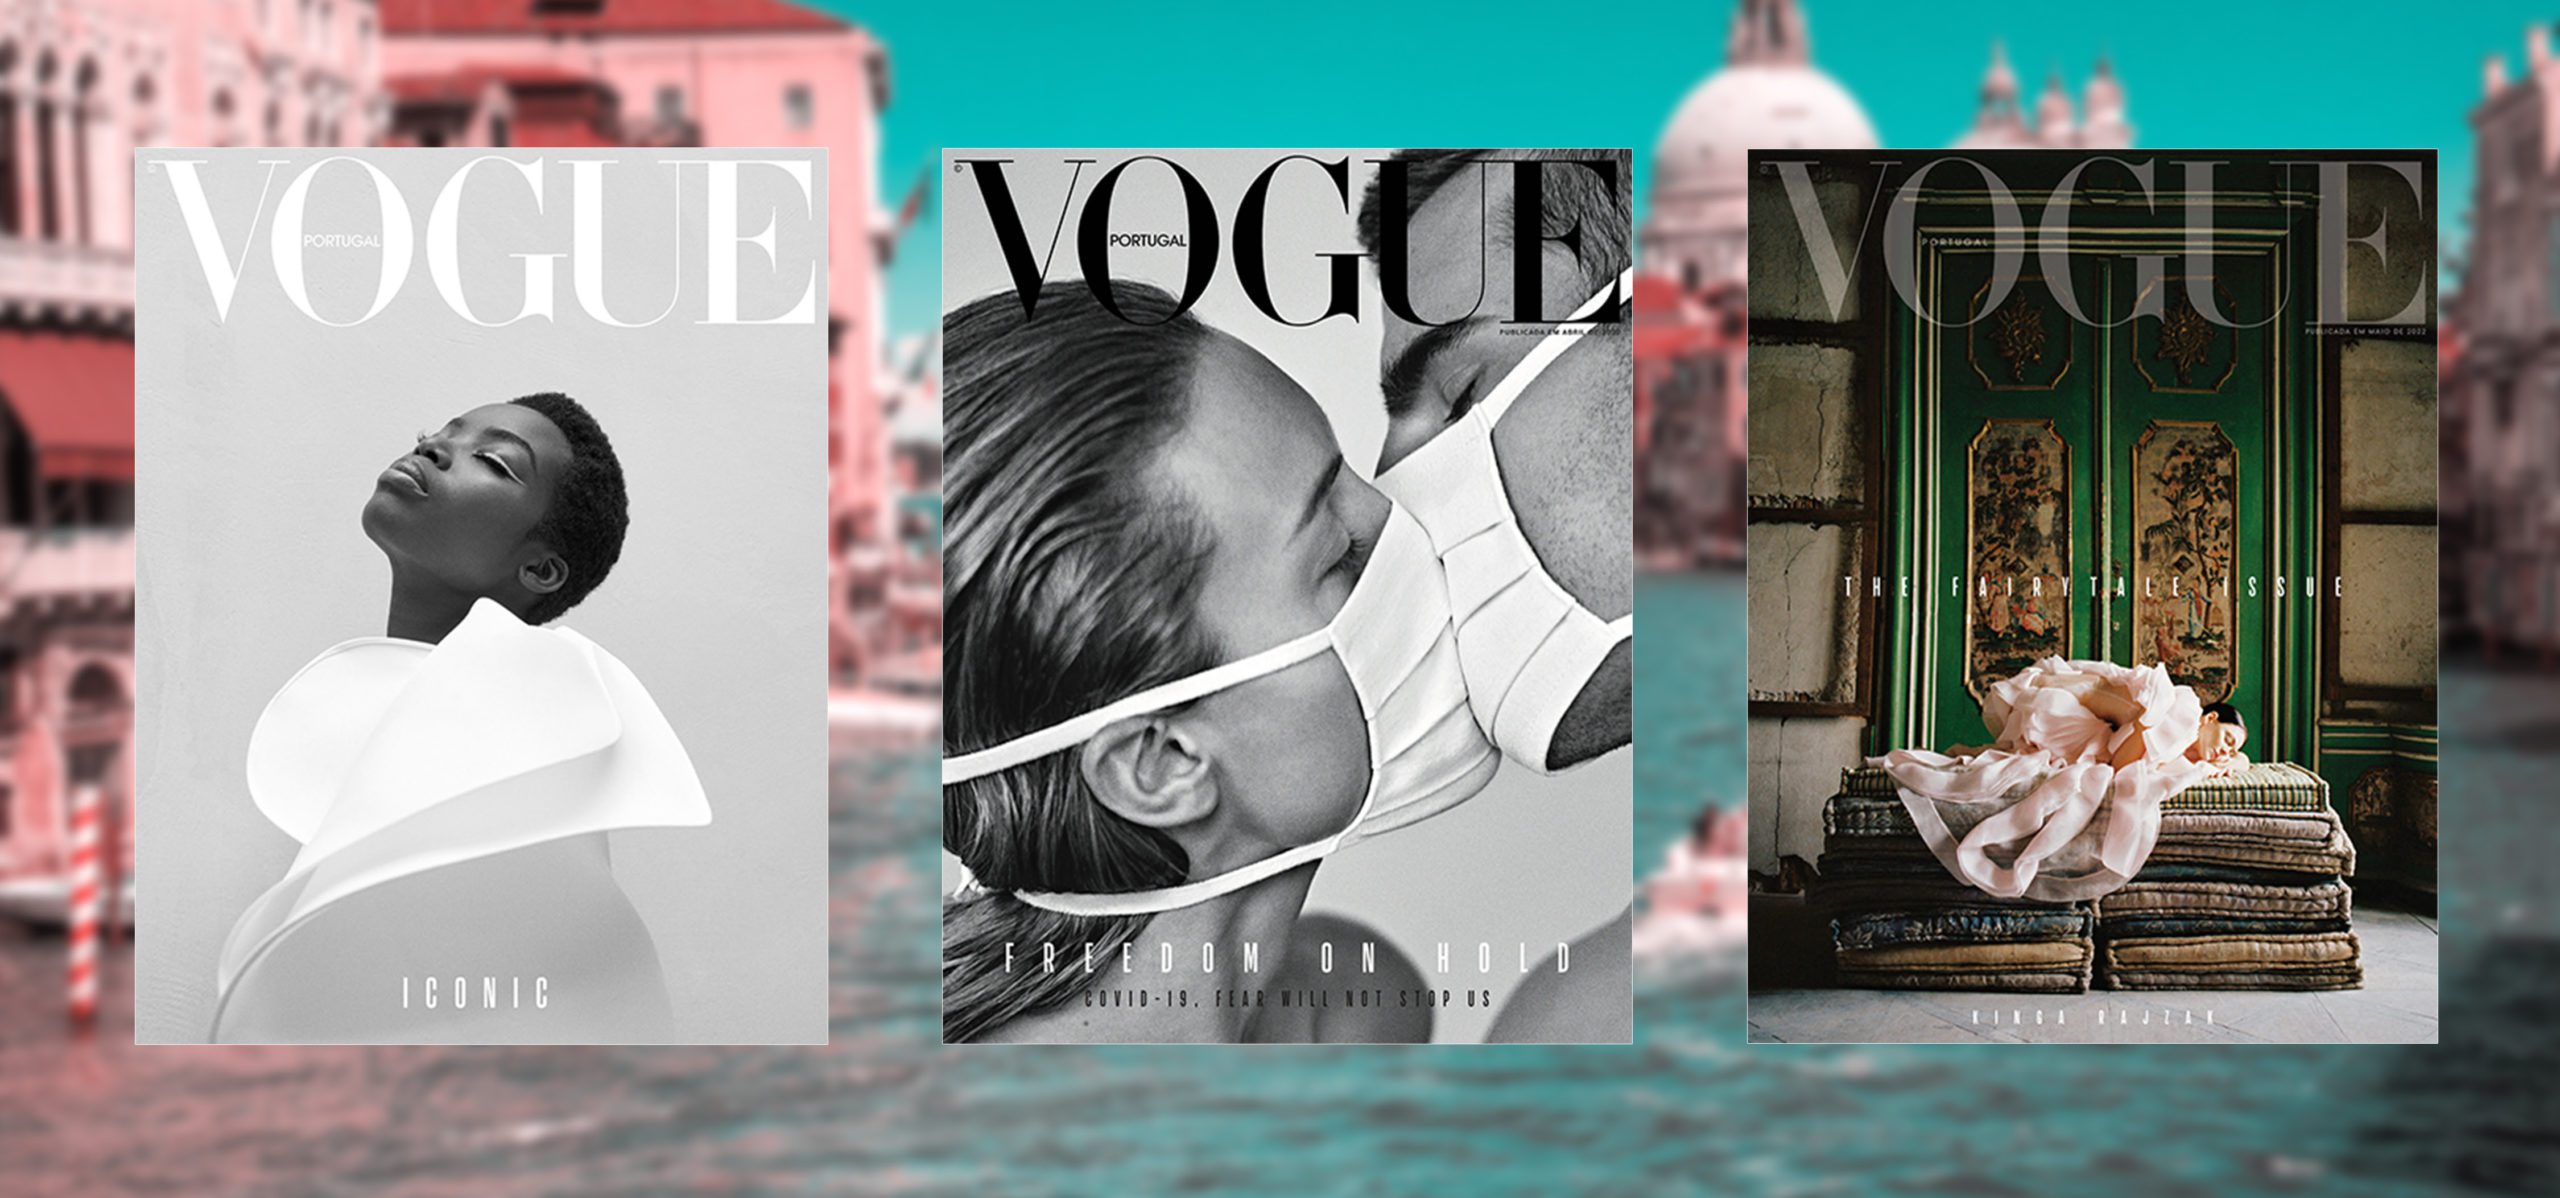 ­Vogue Portugal x Decentral Art Pavilion: Exhibition and Auction of Three Iconic Covers